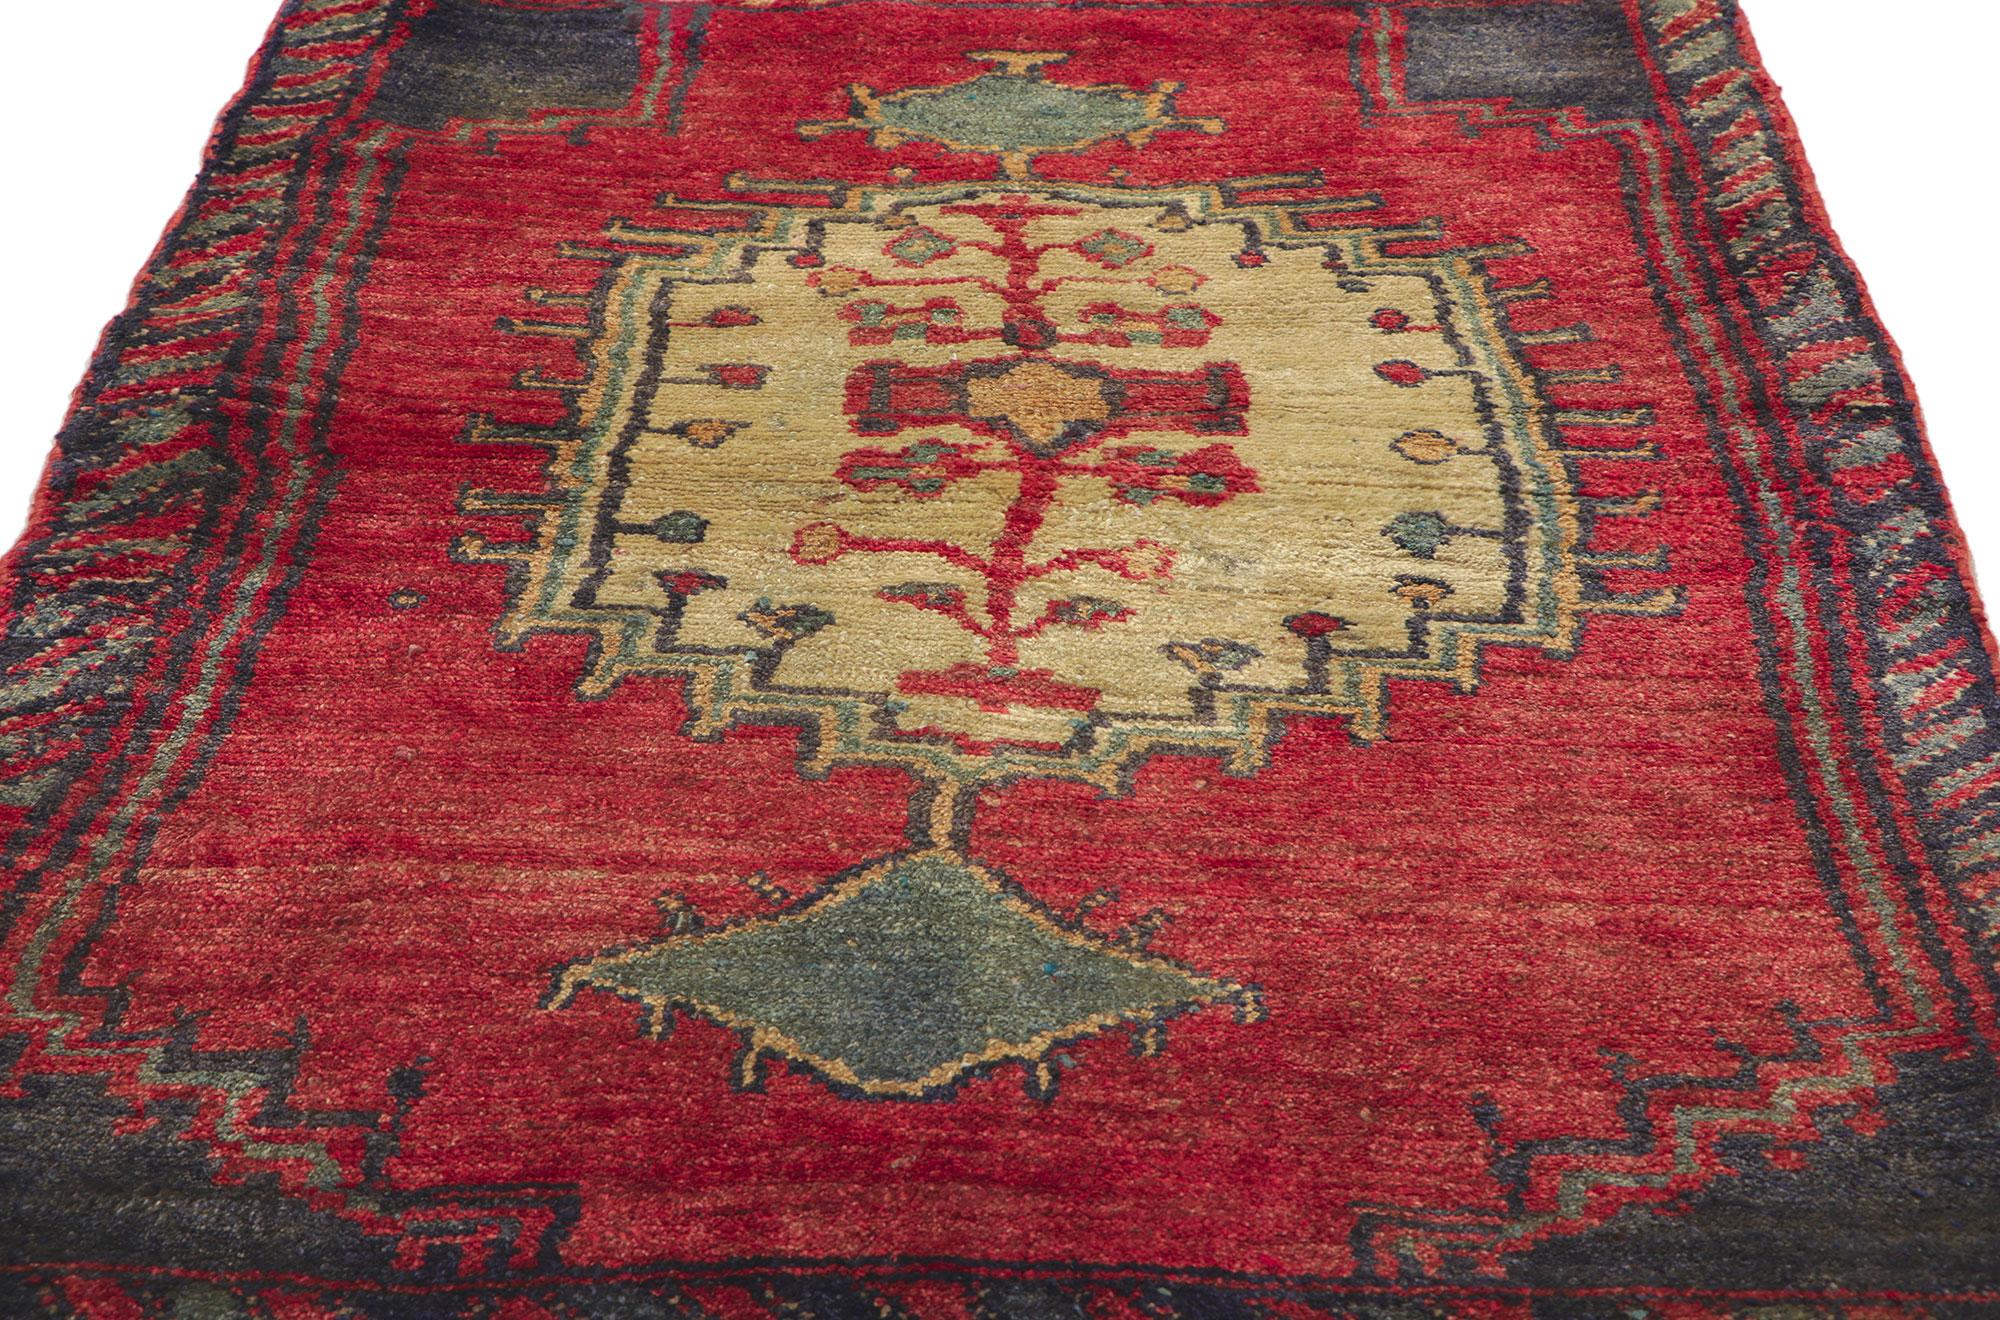 Vintage Persian Shiraz Rug with Tribal Style In Good Condition For Sale In Dallas, TX